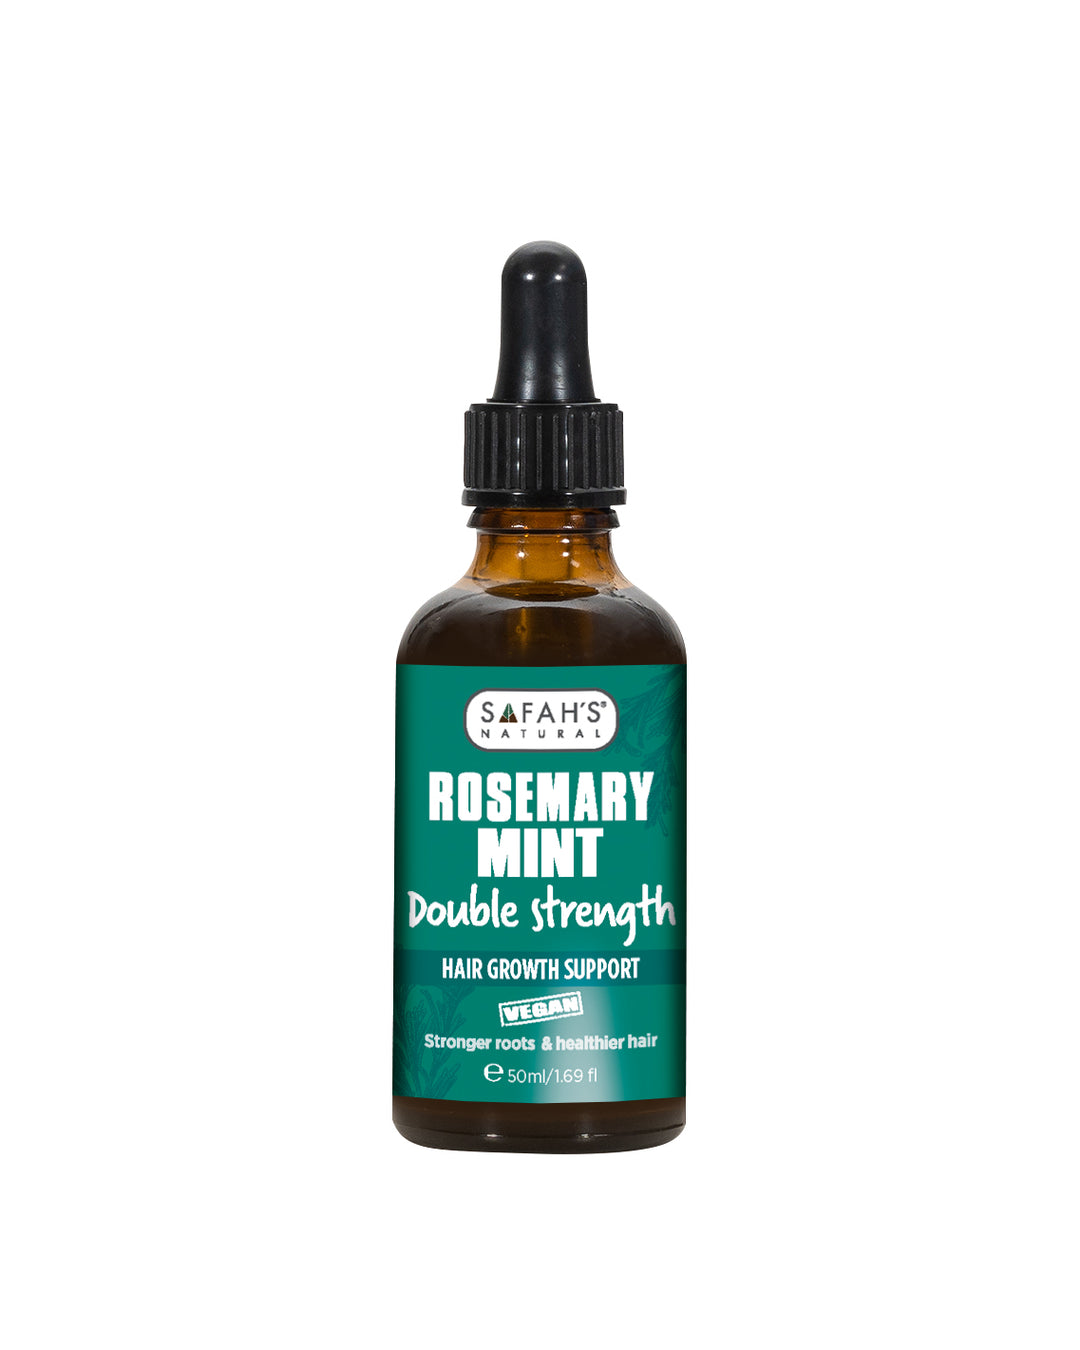 Rosemary Mint Double strength - Enhanced Aromatherapy, Skin, and Hair Benefits